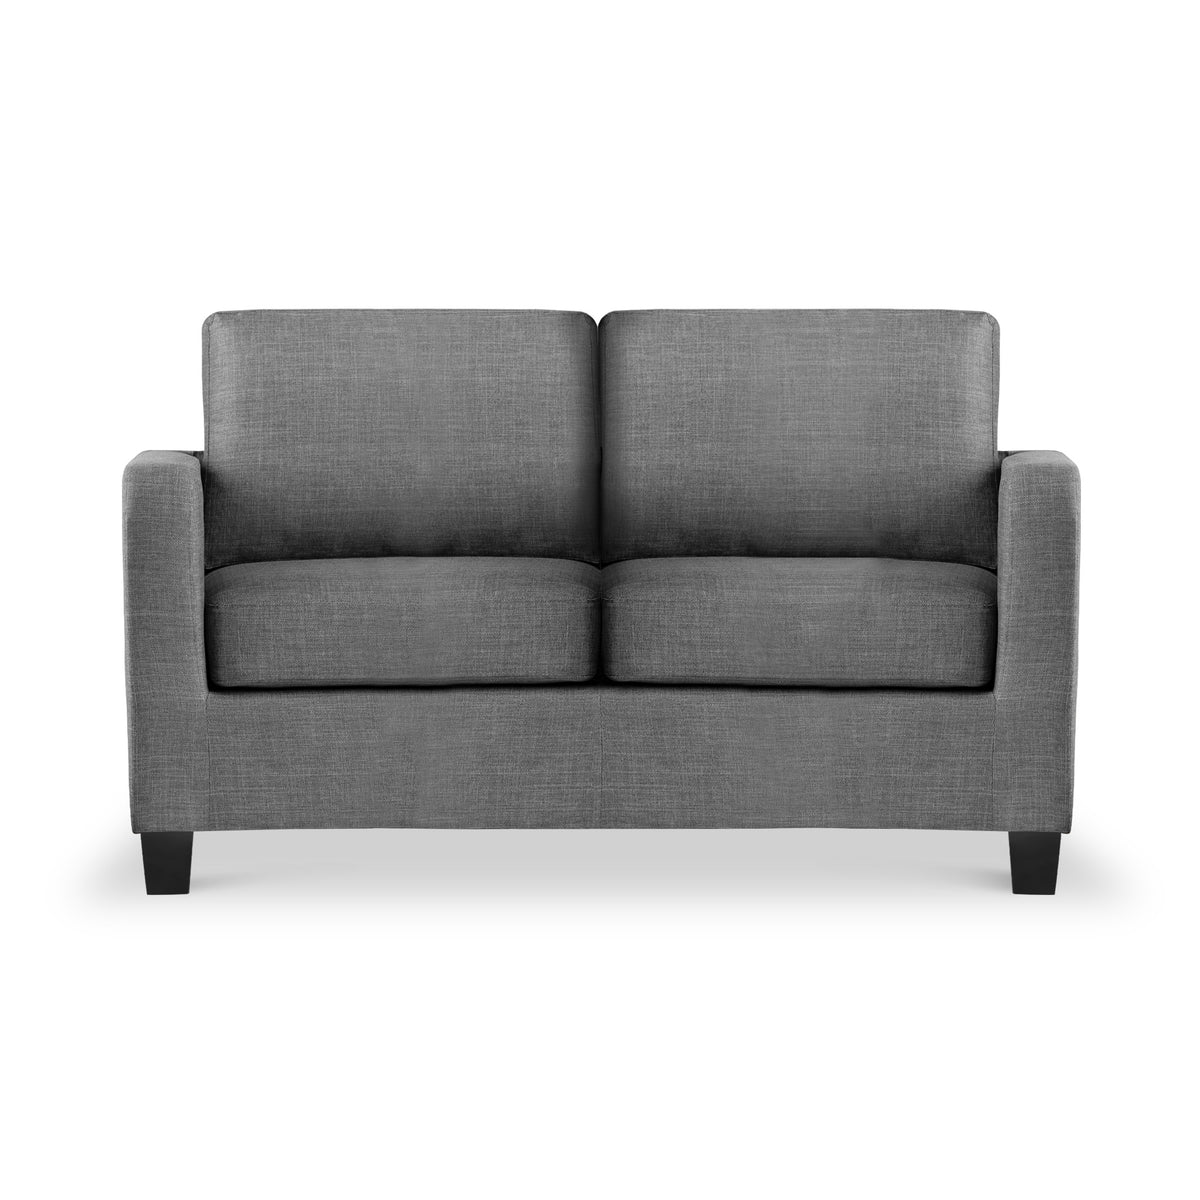 Myles Grey Fabric 2 Seater Sofa from Roseland Furniture